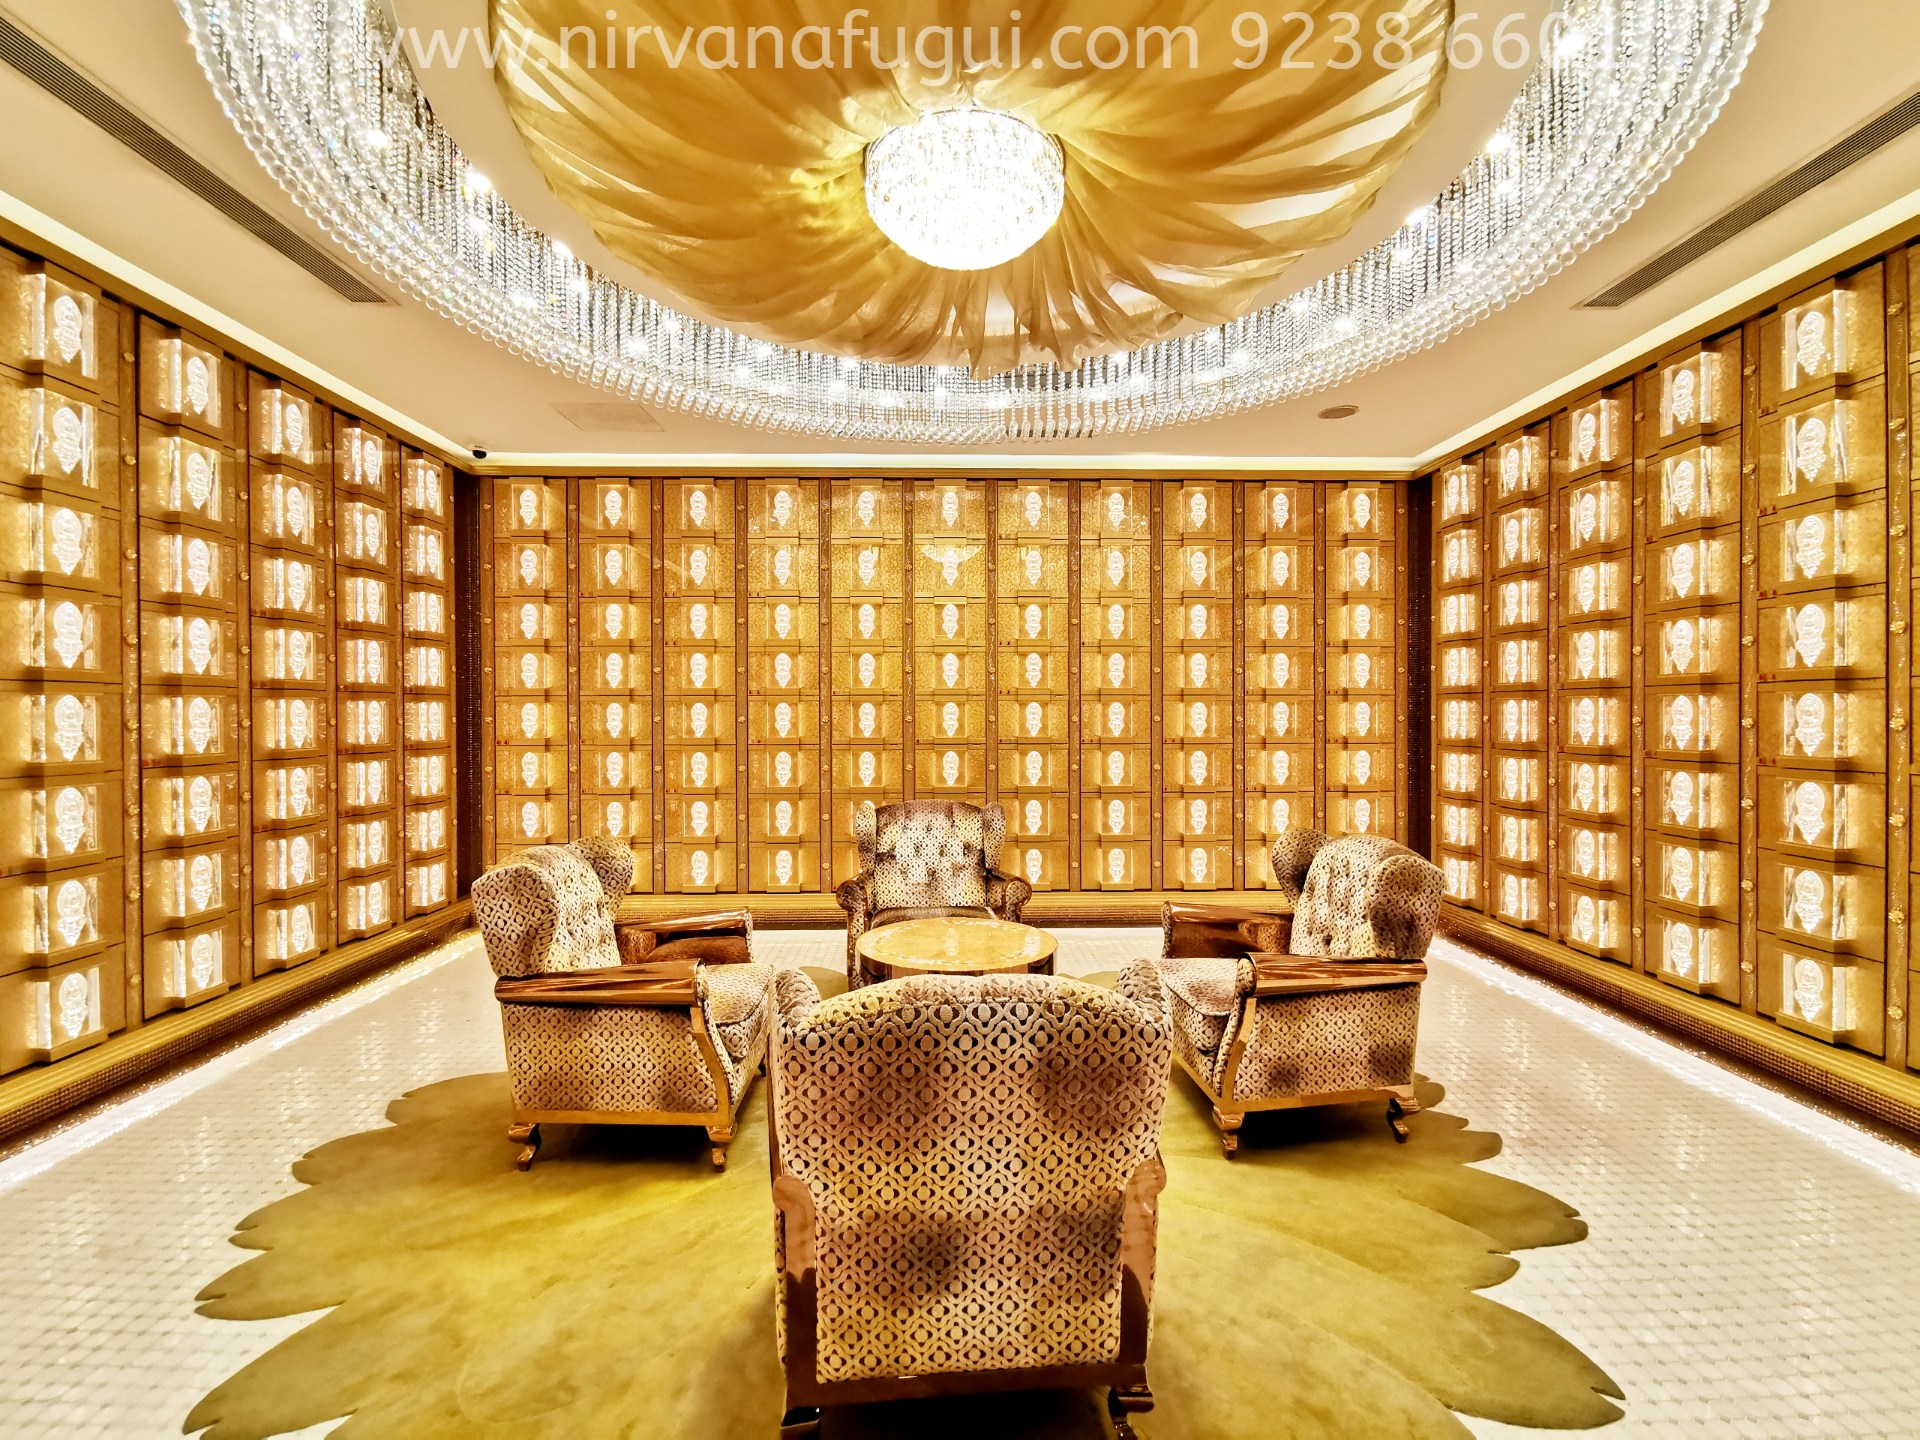 This columbarium is full of shiny gold niches. Many wealthy Singaporean will prefer this columbarium.